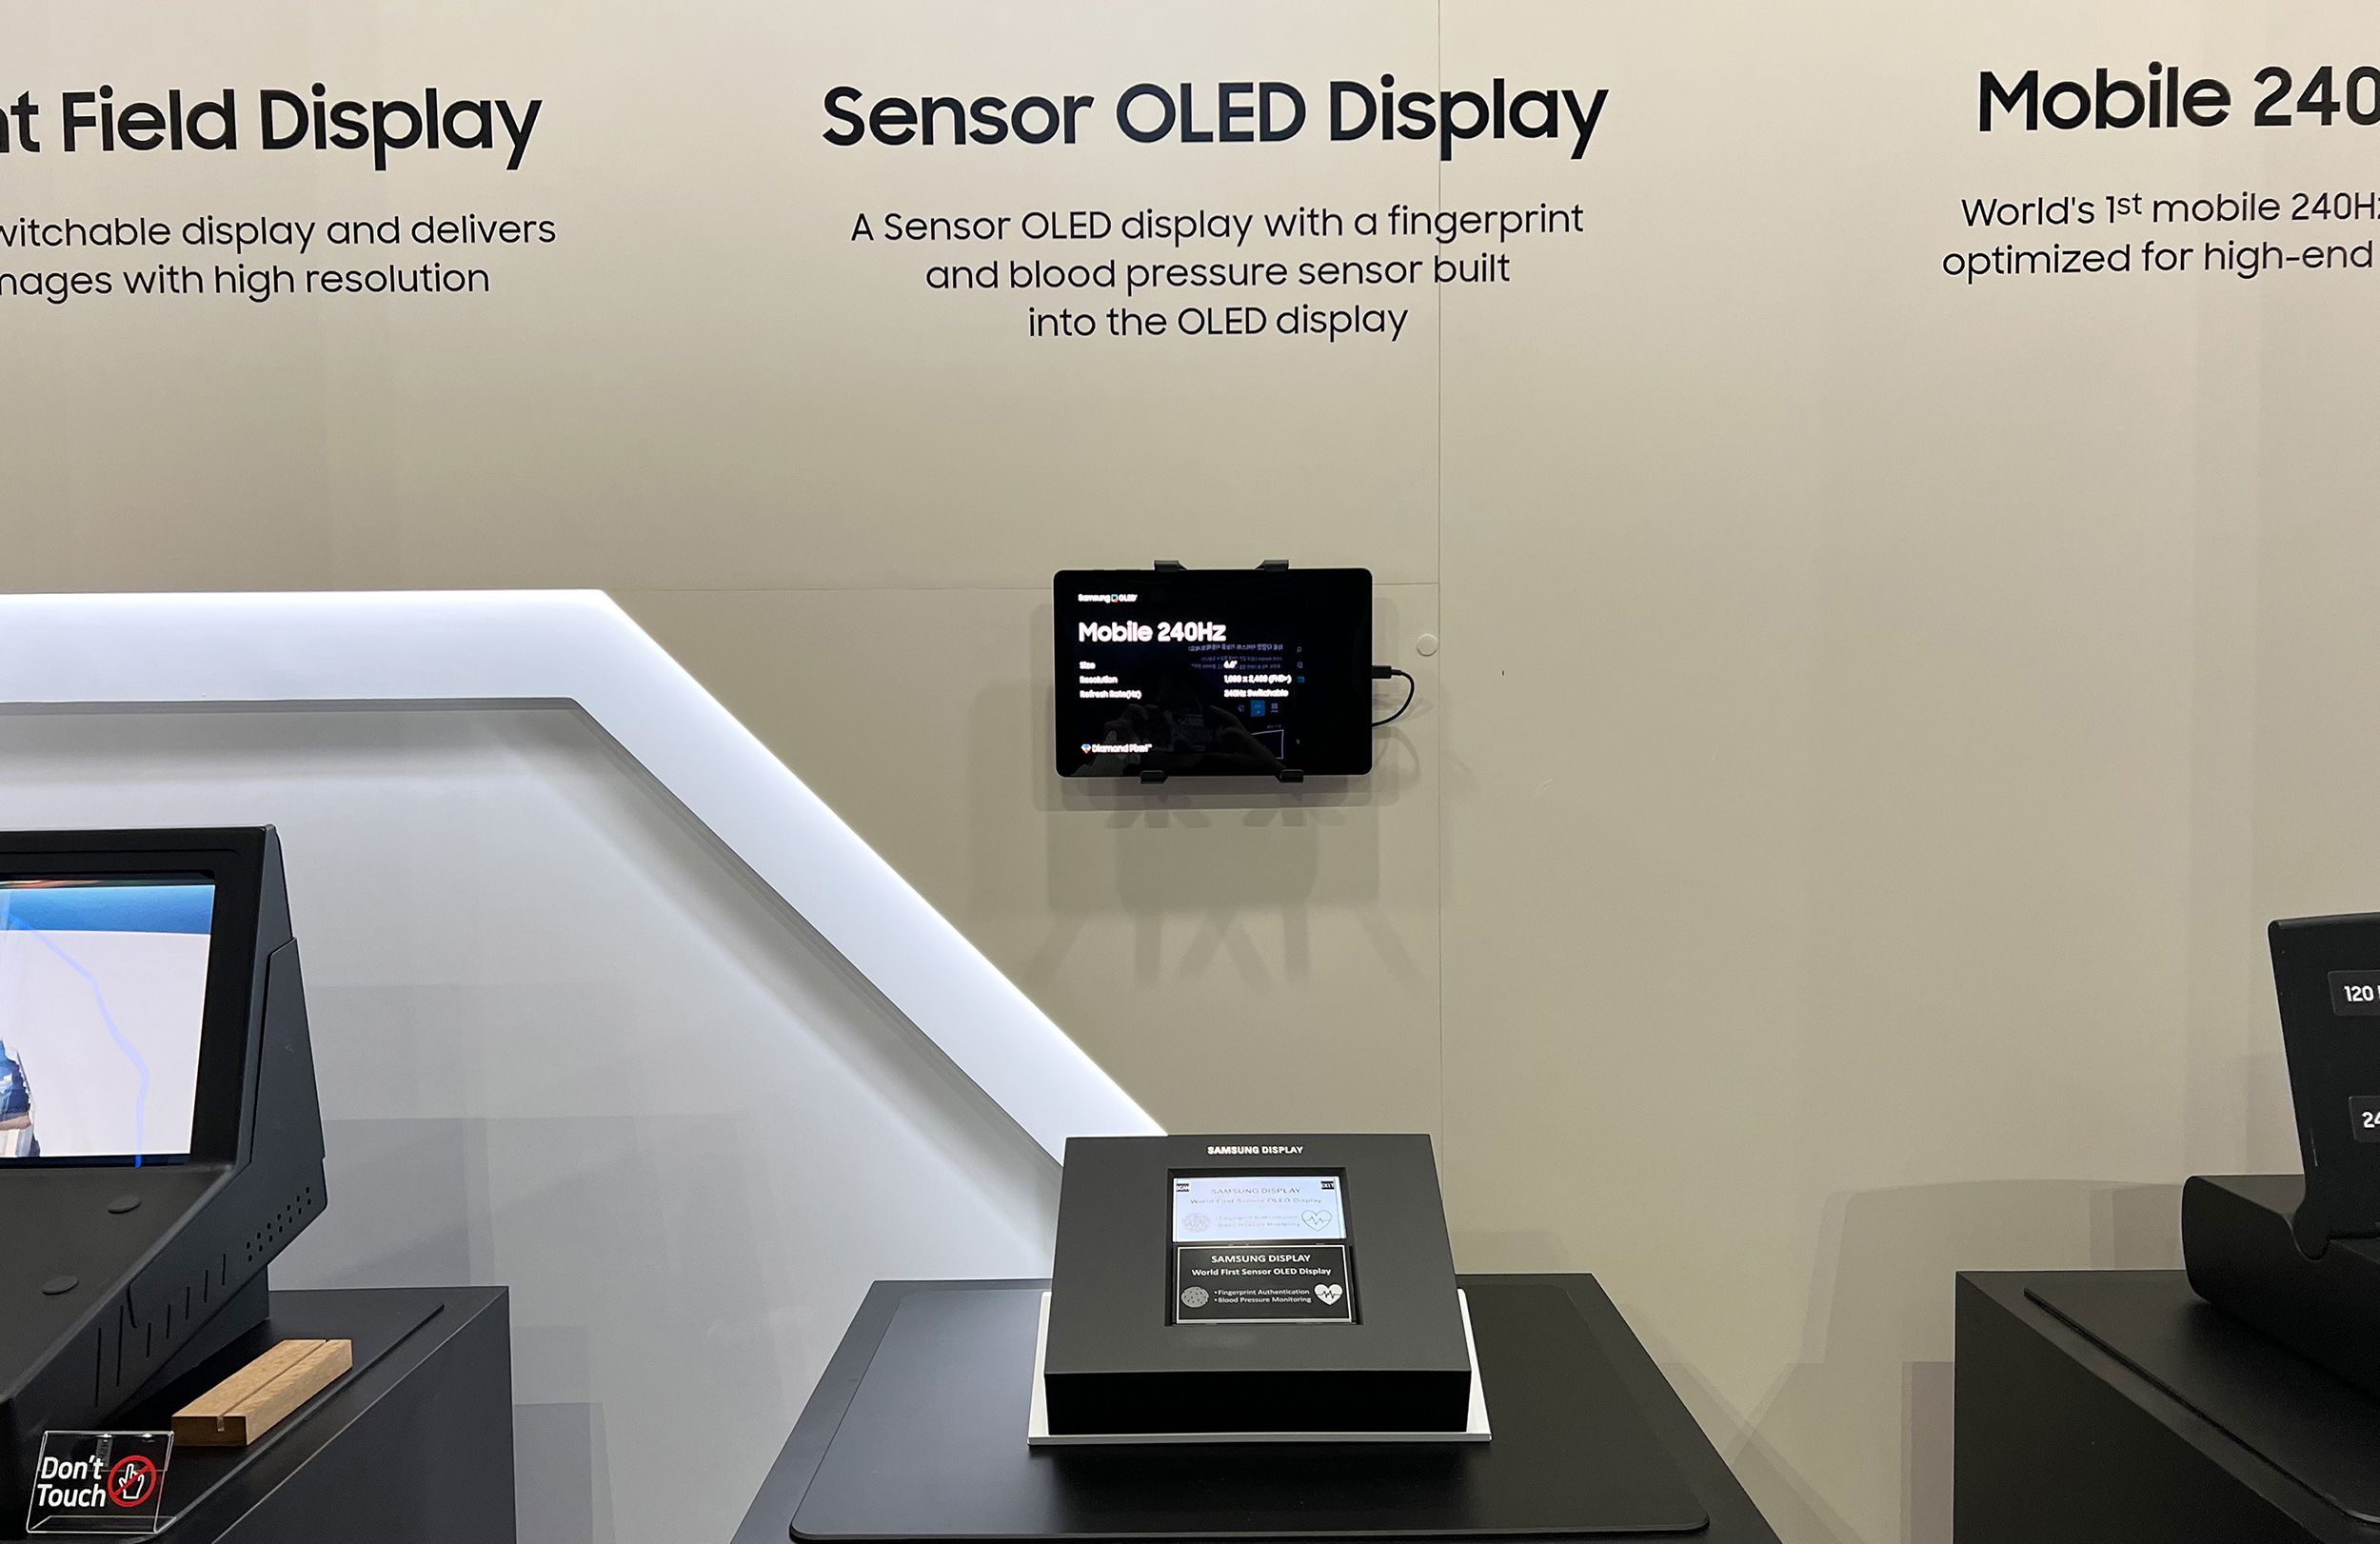 Samsung Display has unveiled a new generation of OLED panel that it says can recognize fingerprints anywhere on the screen and even check the user's h